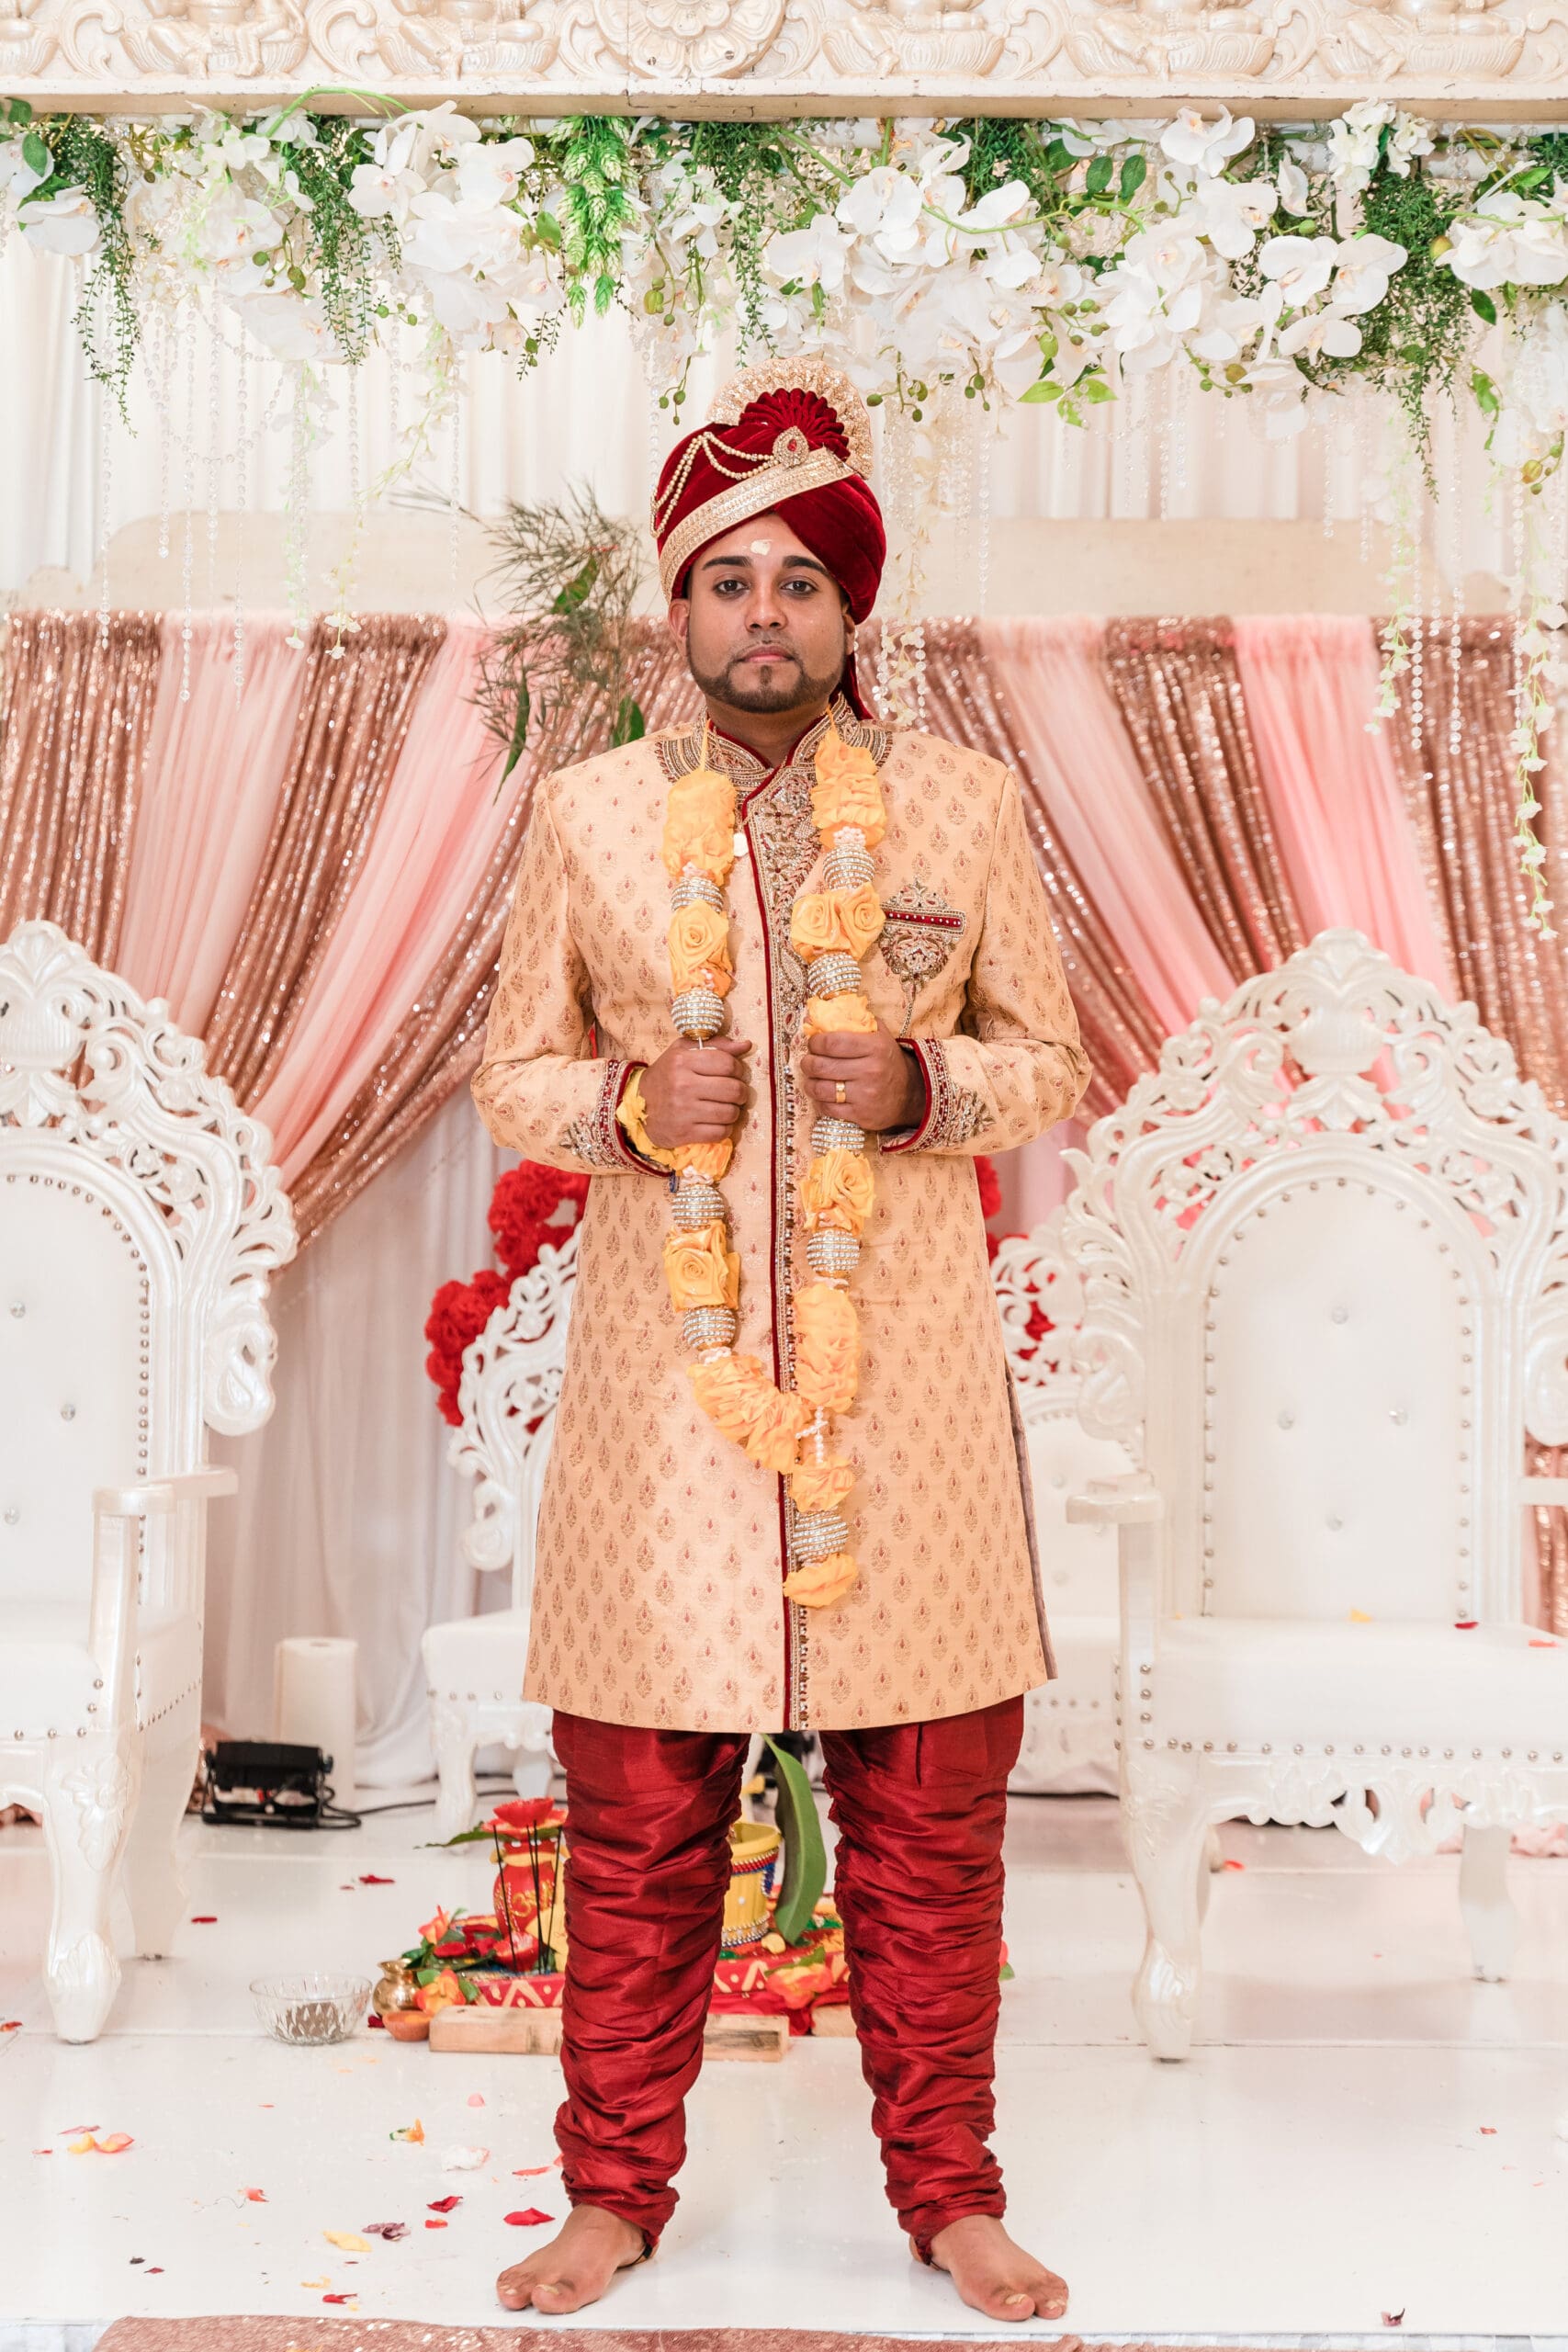 Solo portrait of the groom in traditional Indian wedding attire, featuring a vibrant red and gold outfit